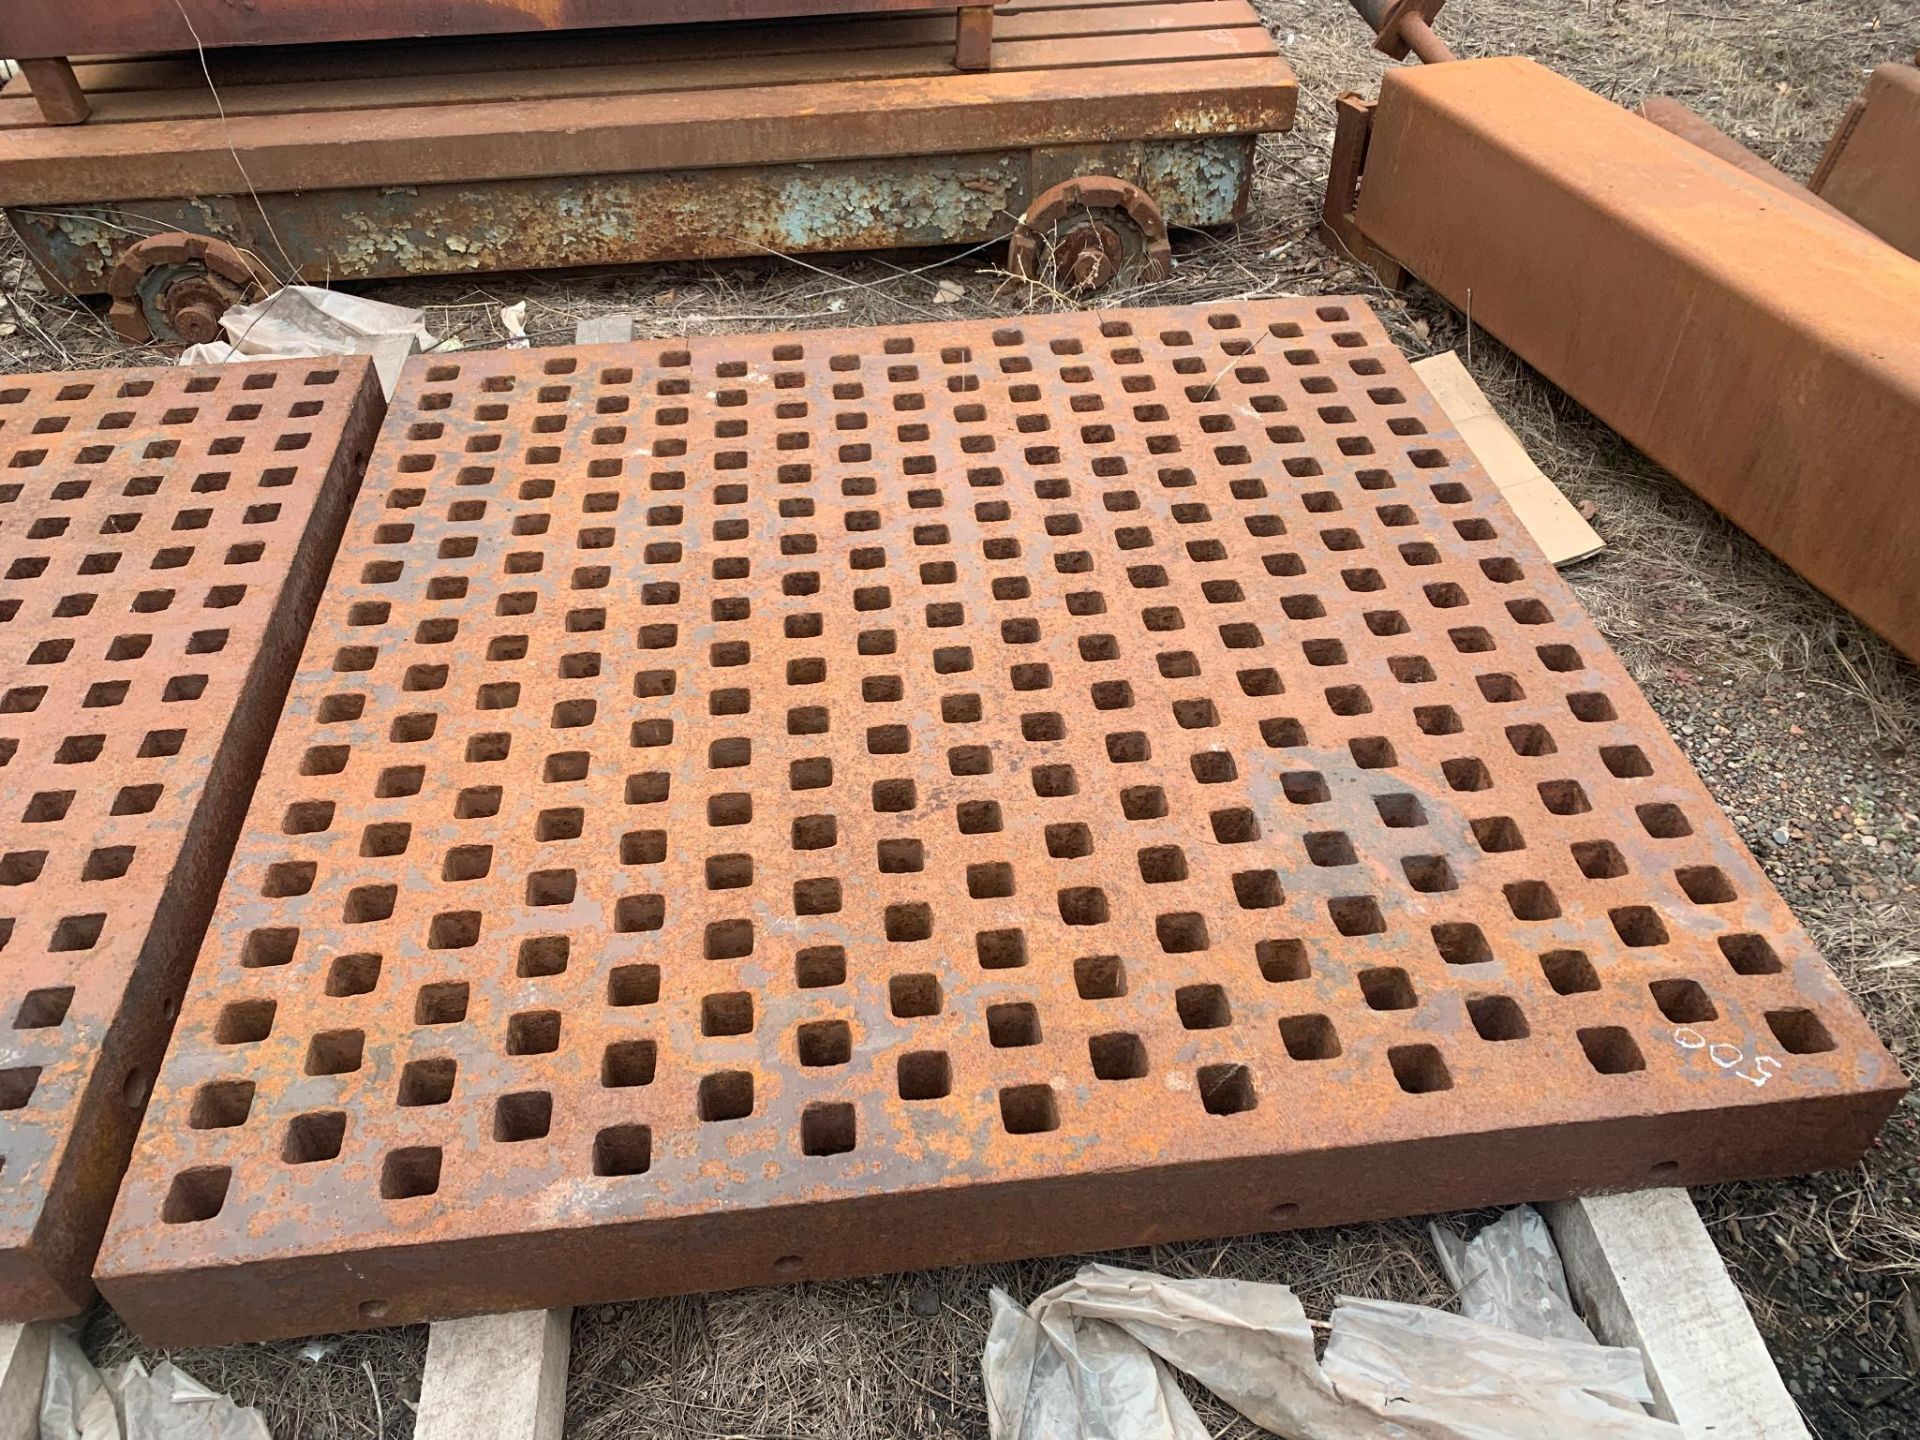 Acorn Style Welding Platen. Approx 61.5" x 61.5" x 5.25" deep with 2" square holes. Note: Small crac - Image 2 of 33